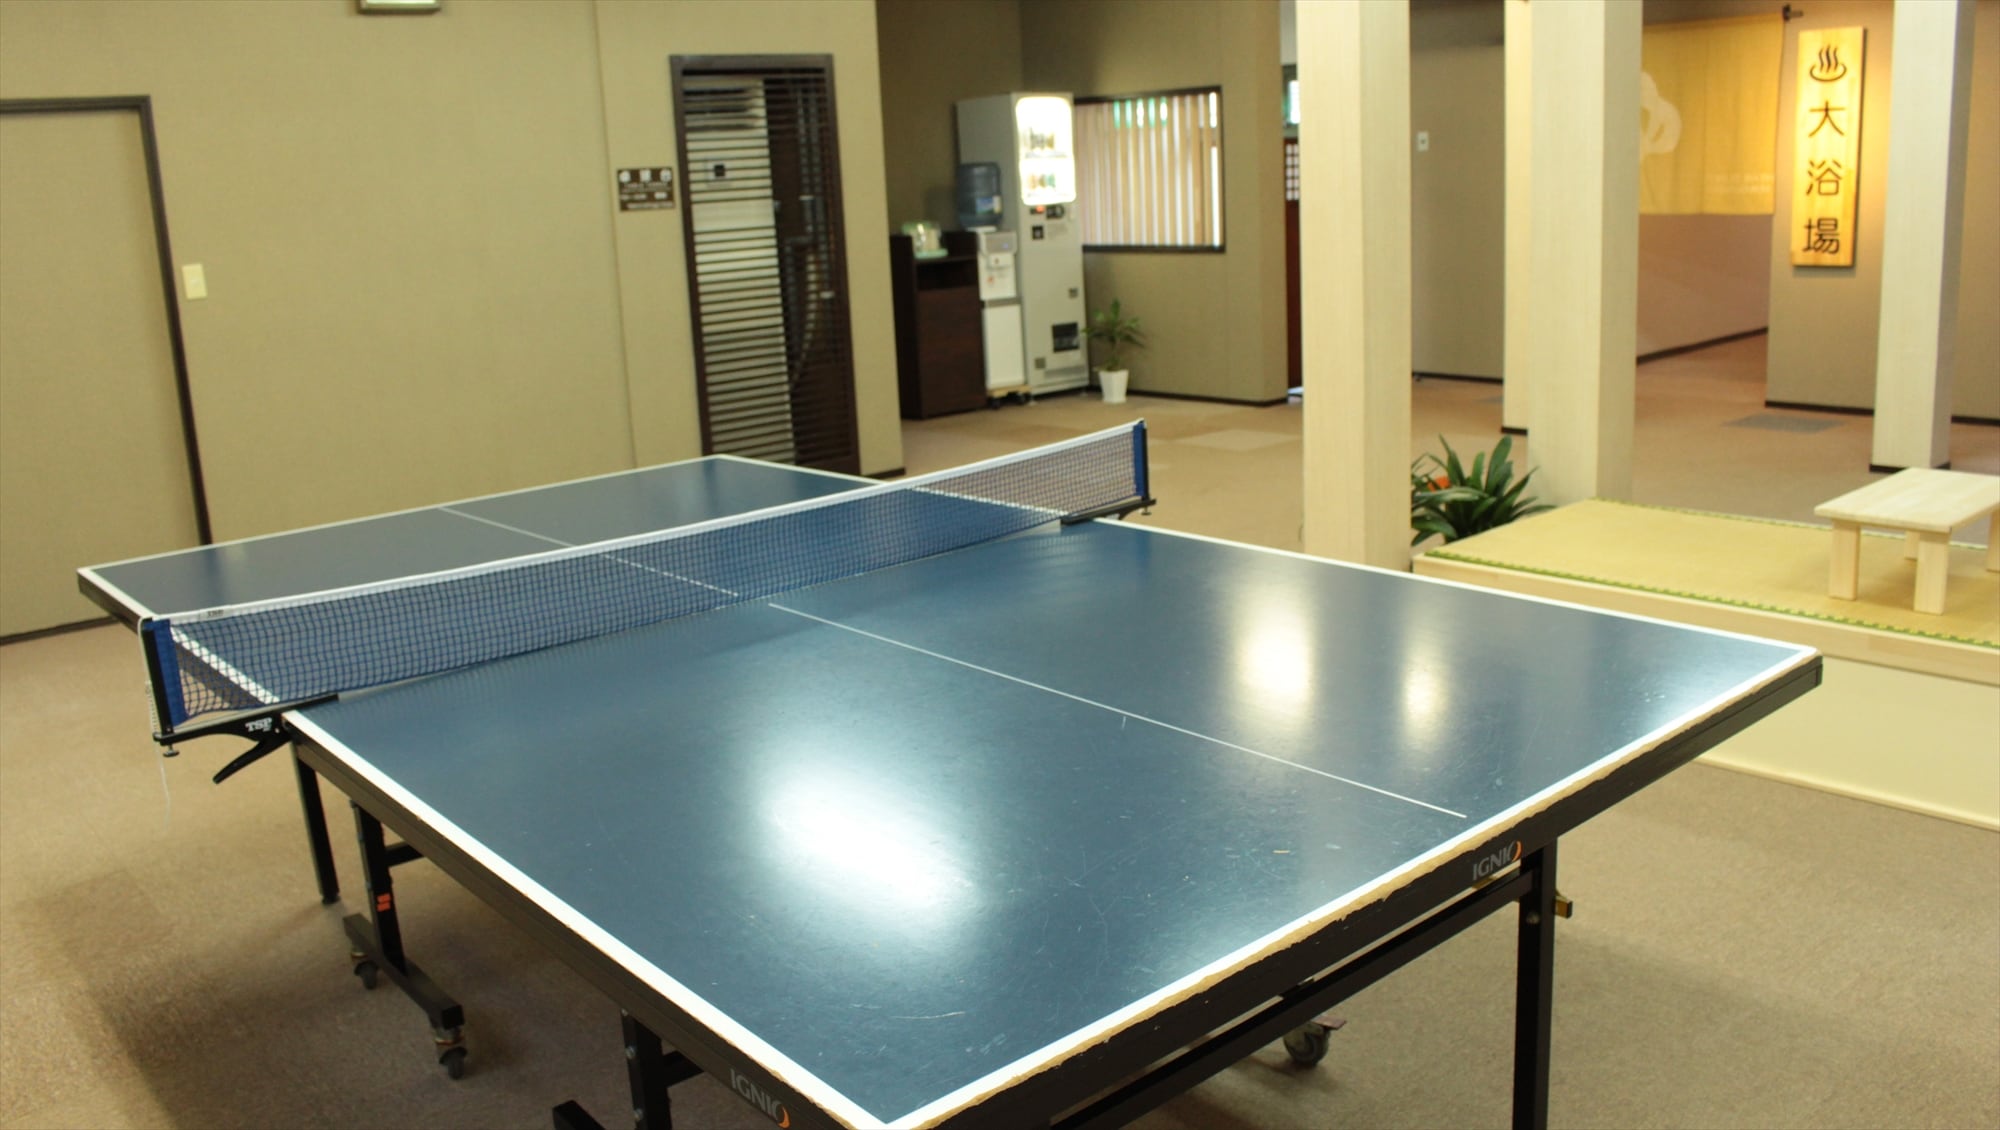 "Ping Pong Table" There is a table tennis table that you can use for free. Exercise before dinner (^^ ;;